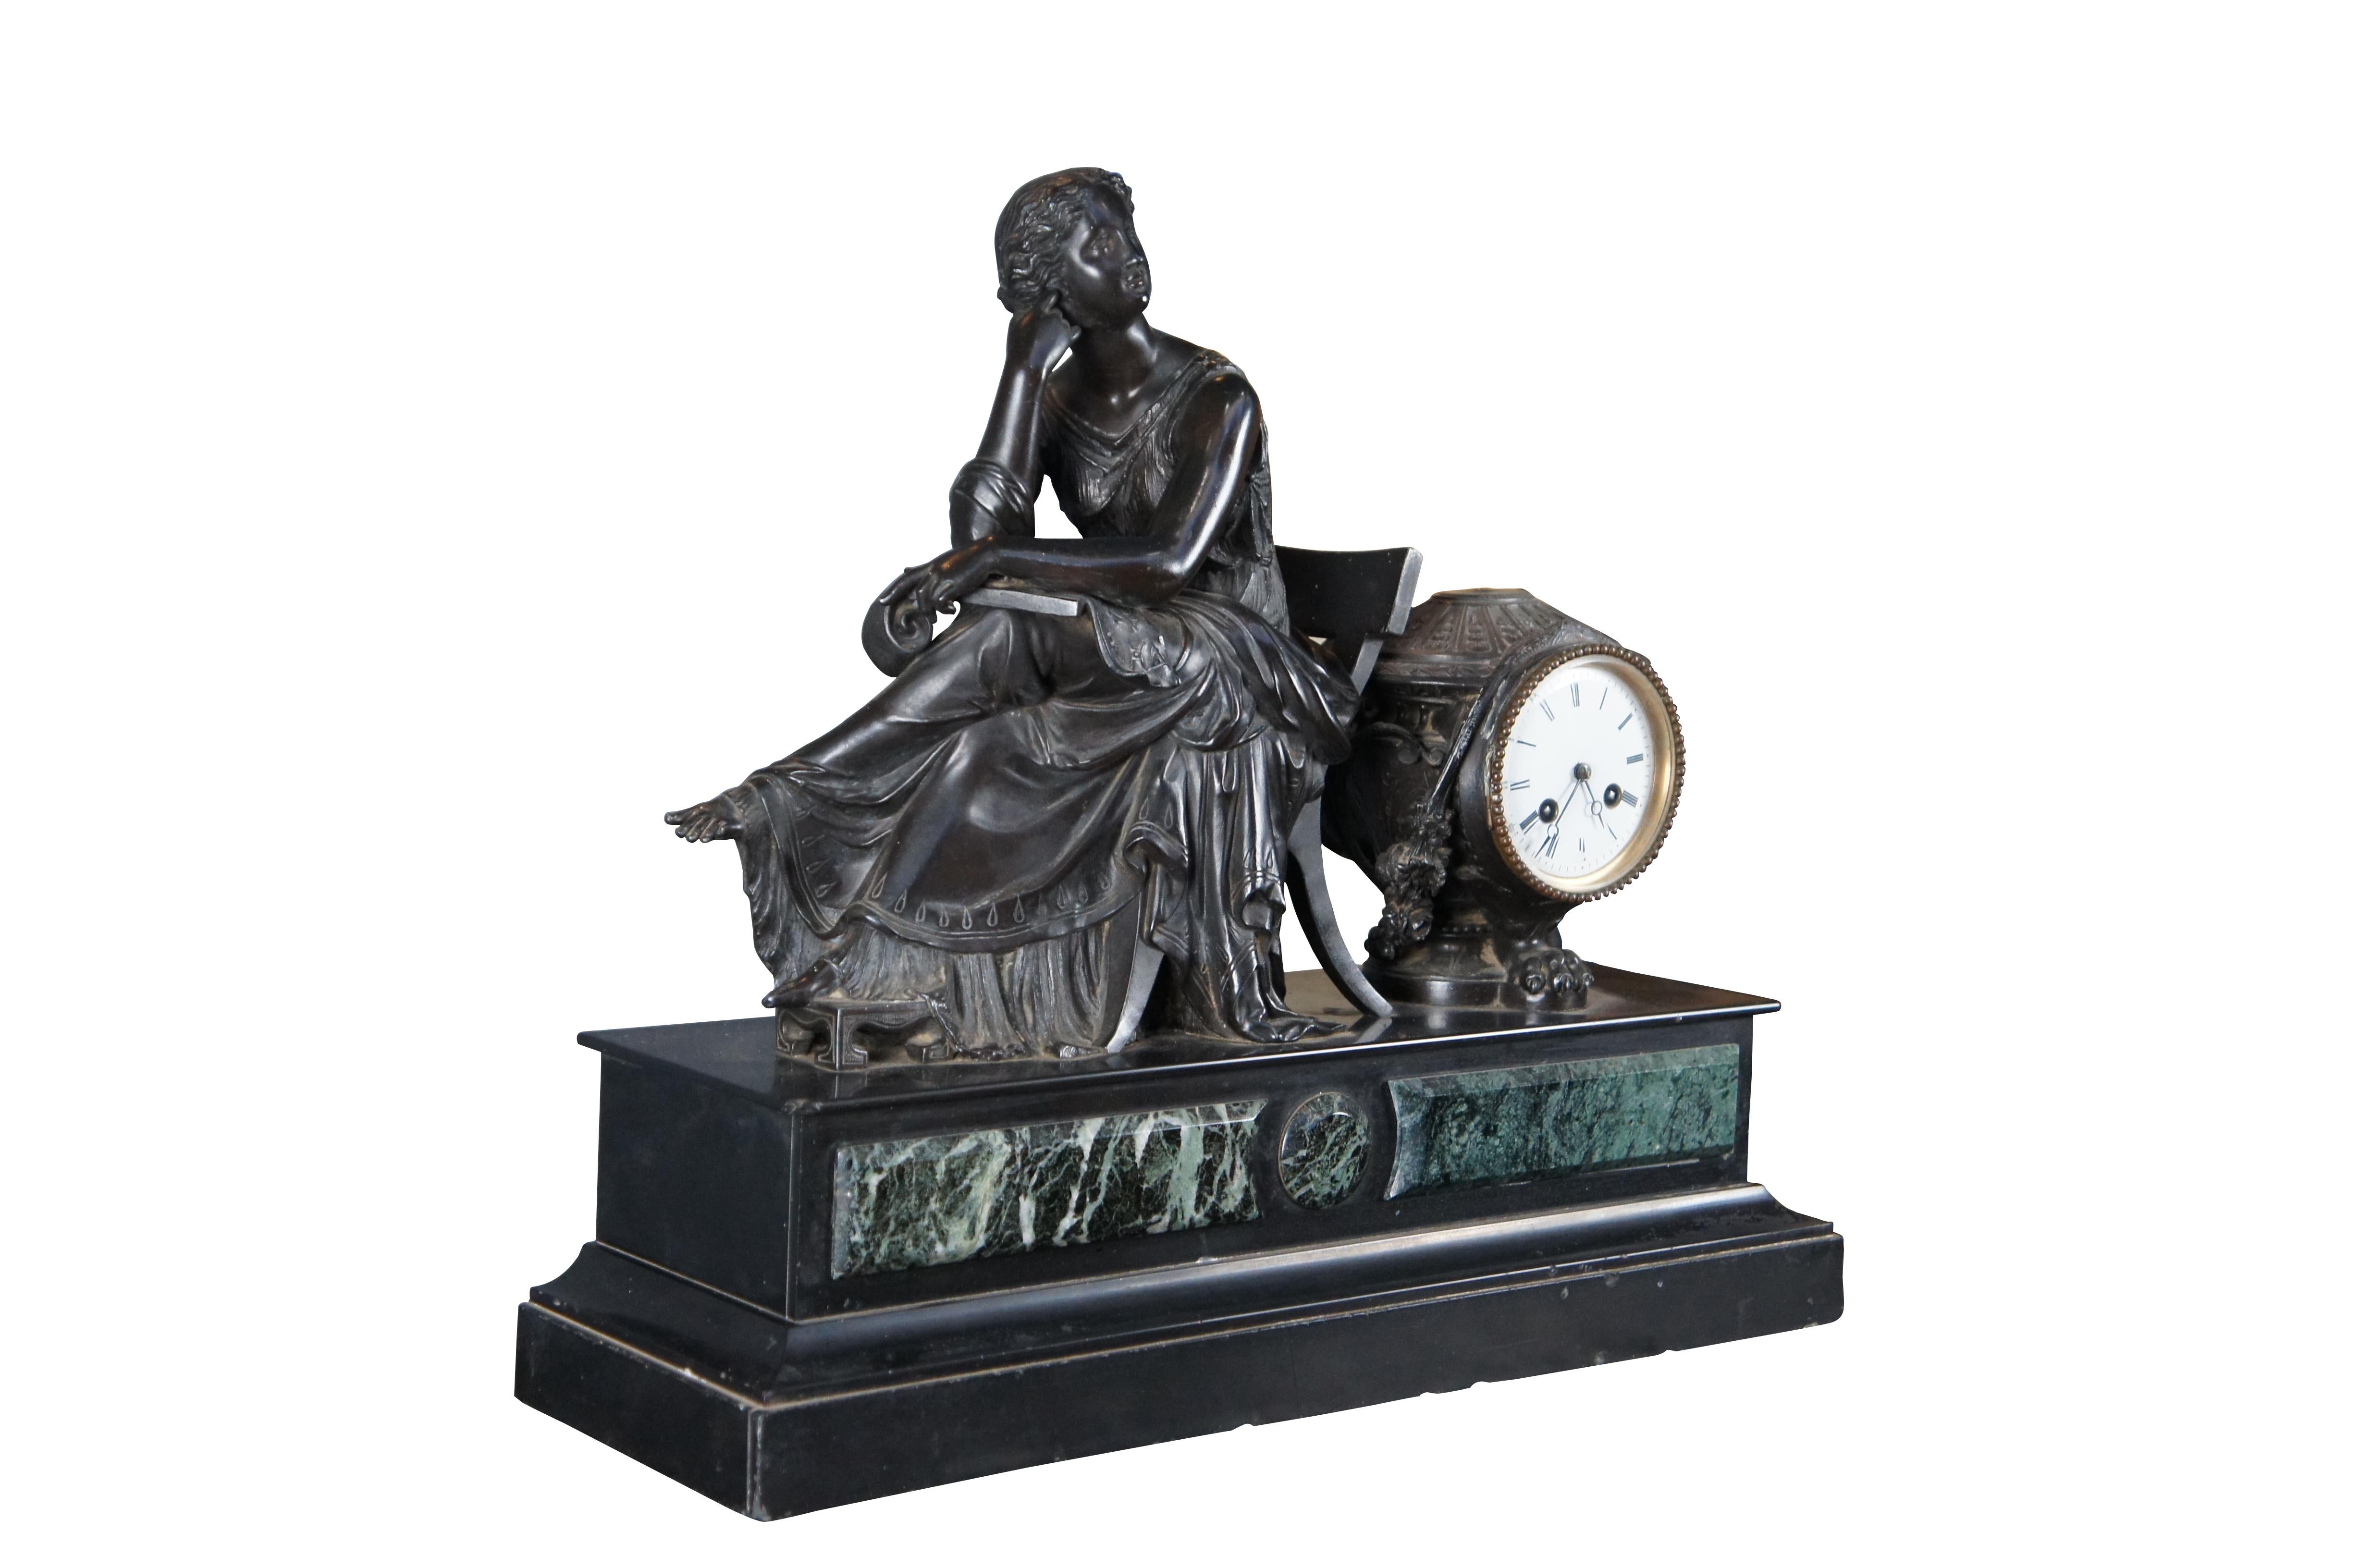 A beautiful 19th Century French Mantel Clock. Features a seated woman in the thinker position. She is wearing a large flowing dress, sitting on a Klismos chair with footed raised over a stool. Behind the figure is the clock houses in an ornate urn